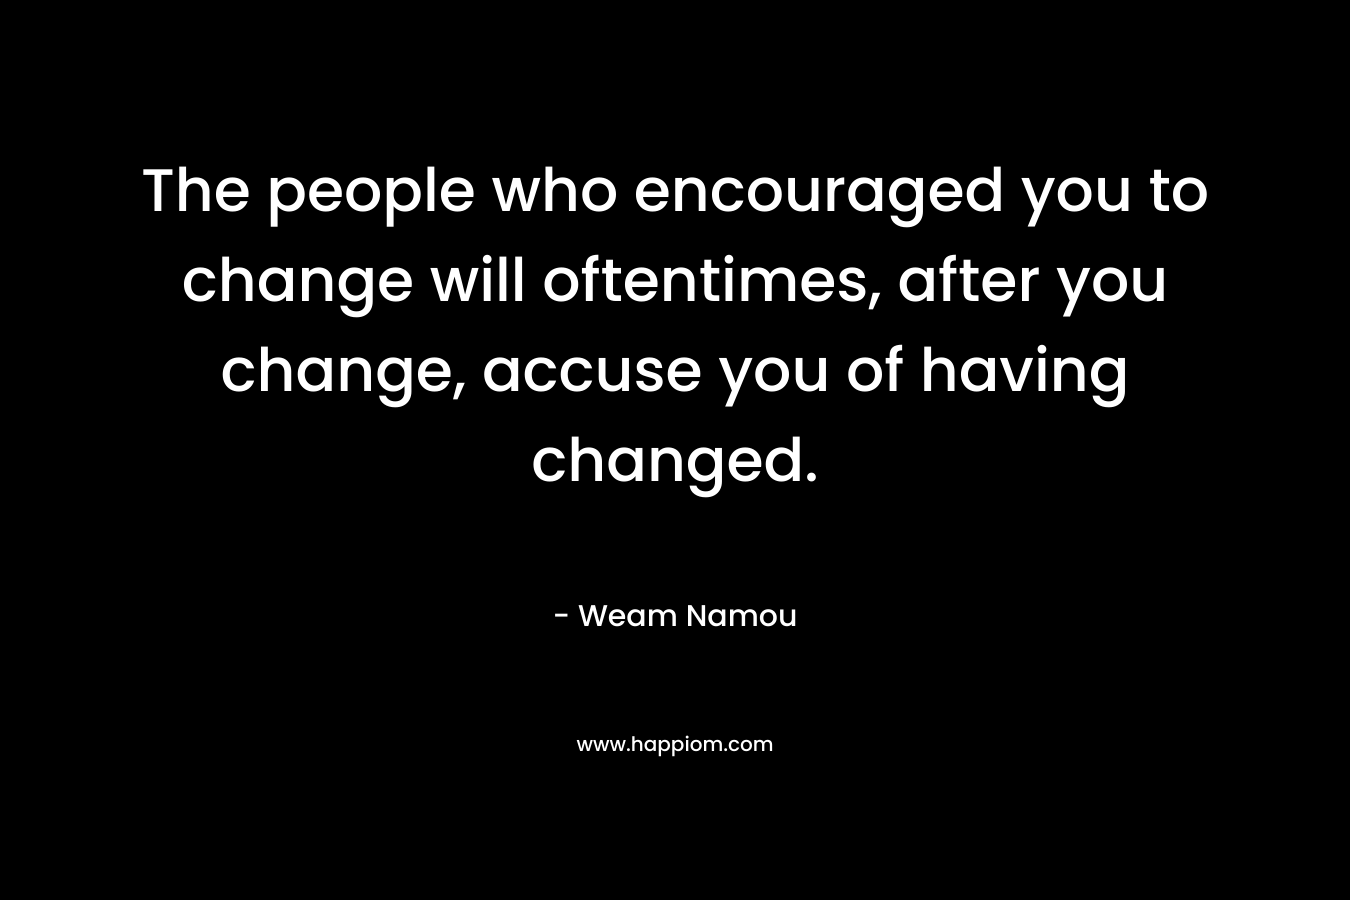 The people who encouraged you to change will oftentimes, after you change, accuse you of having changed.